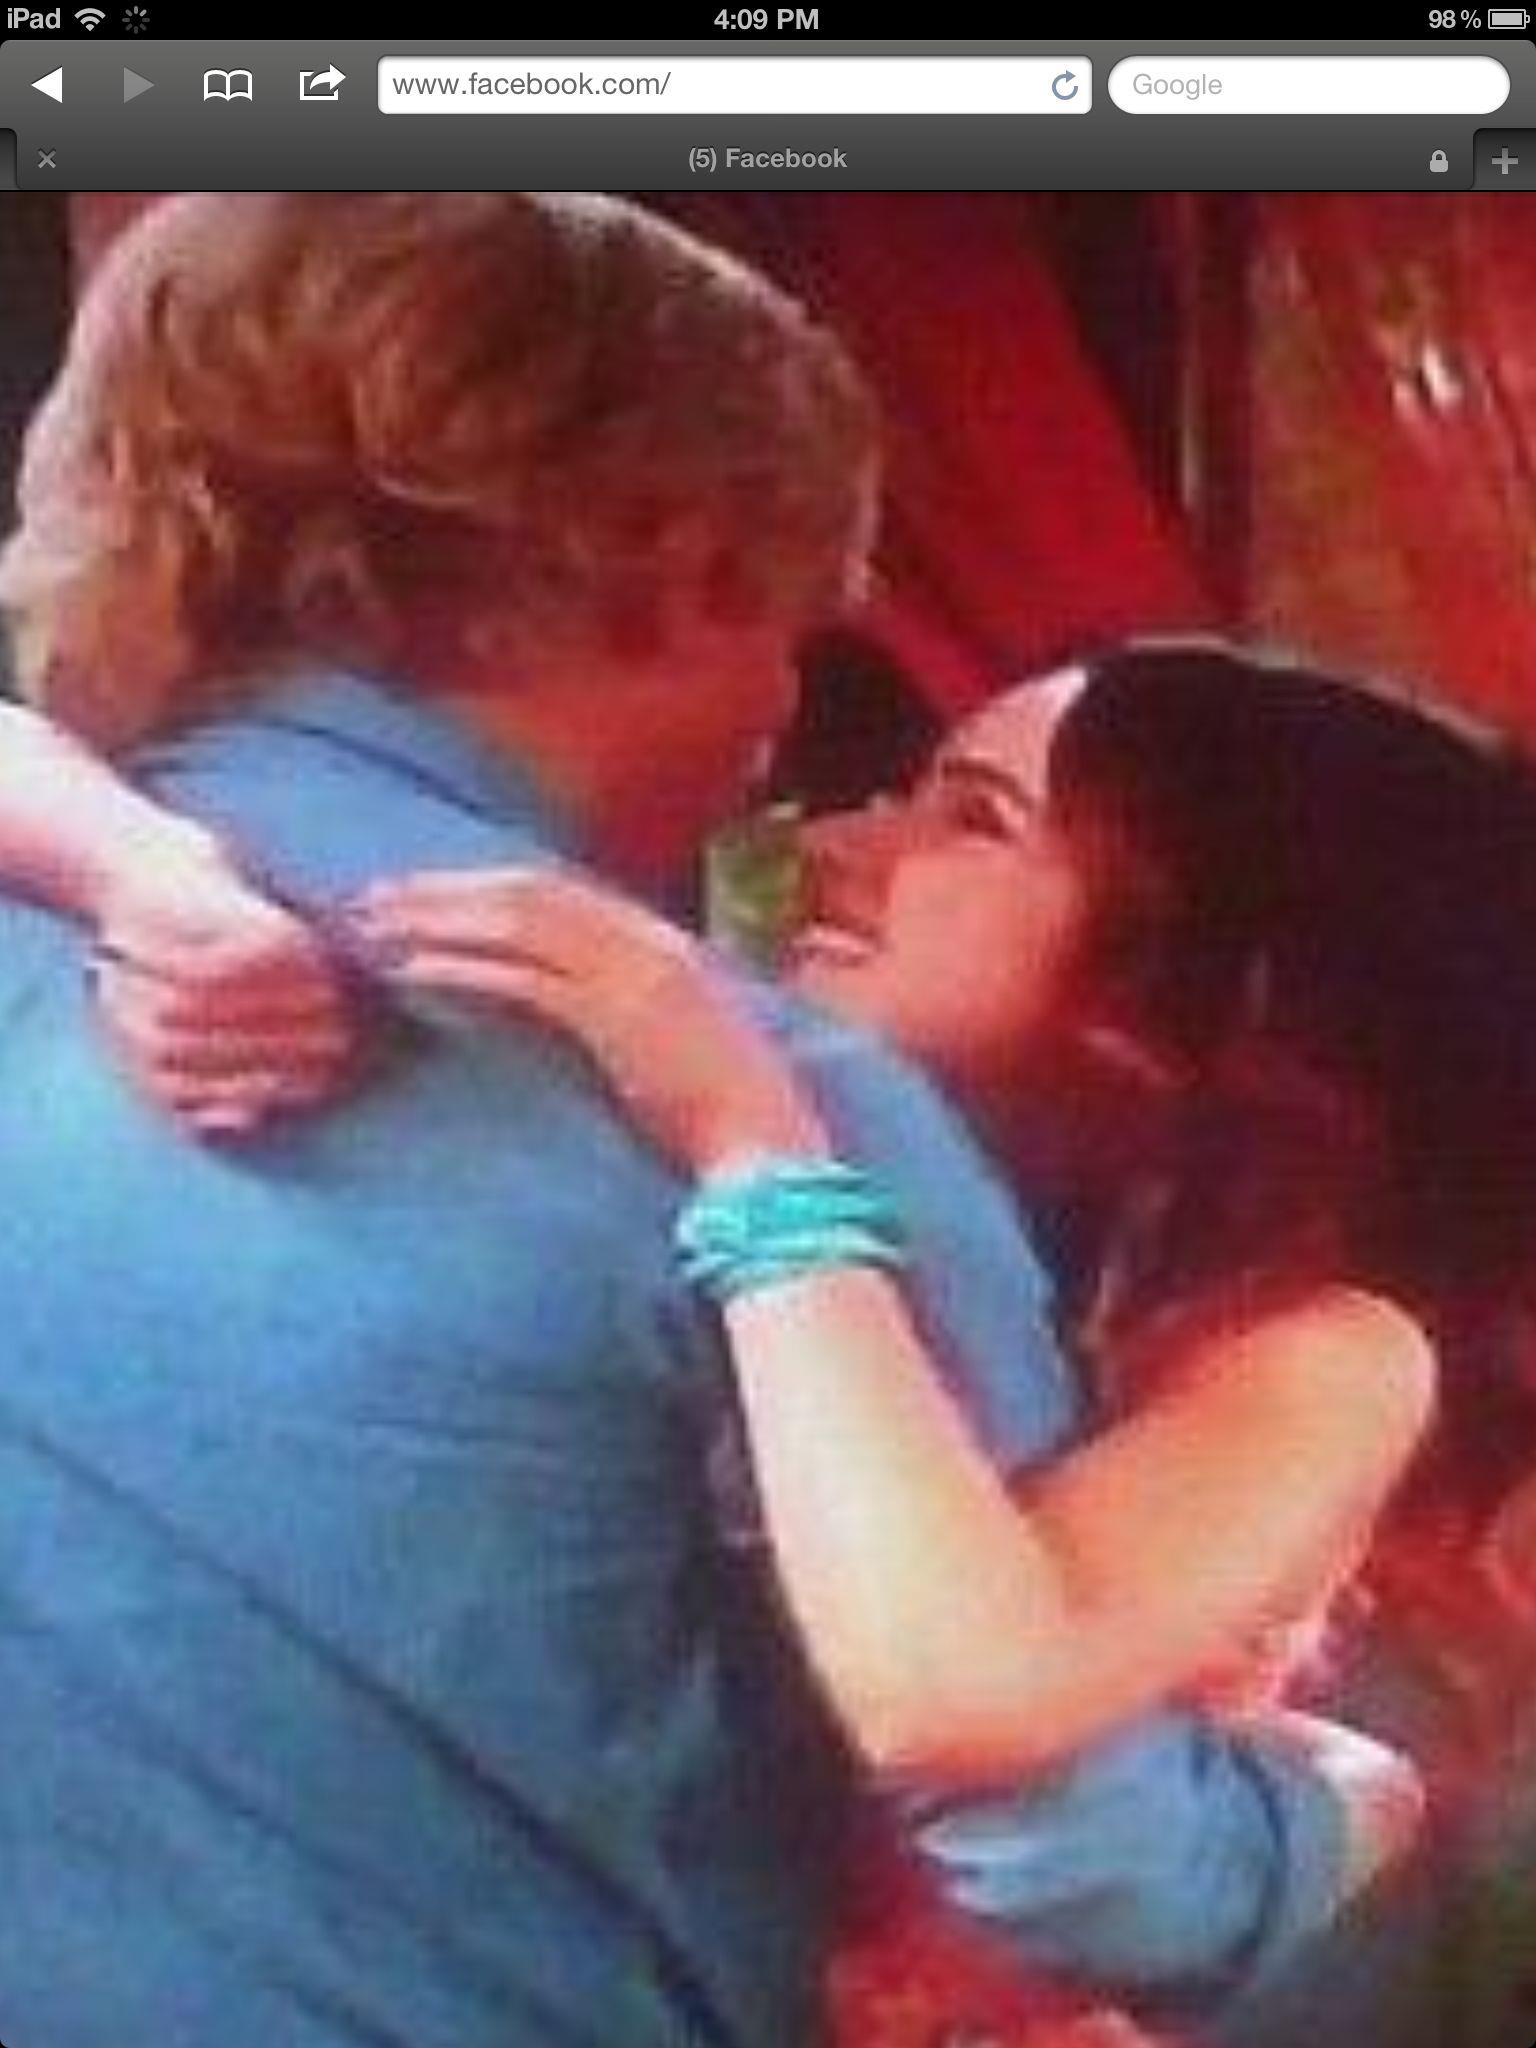 what episodes are austin and ally dating